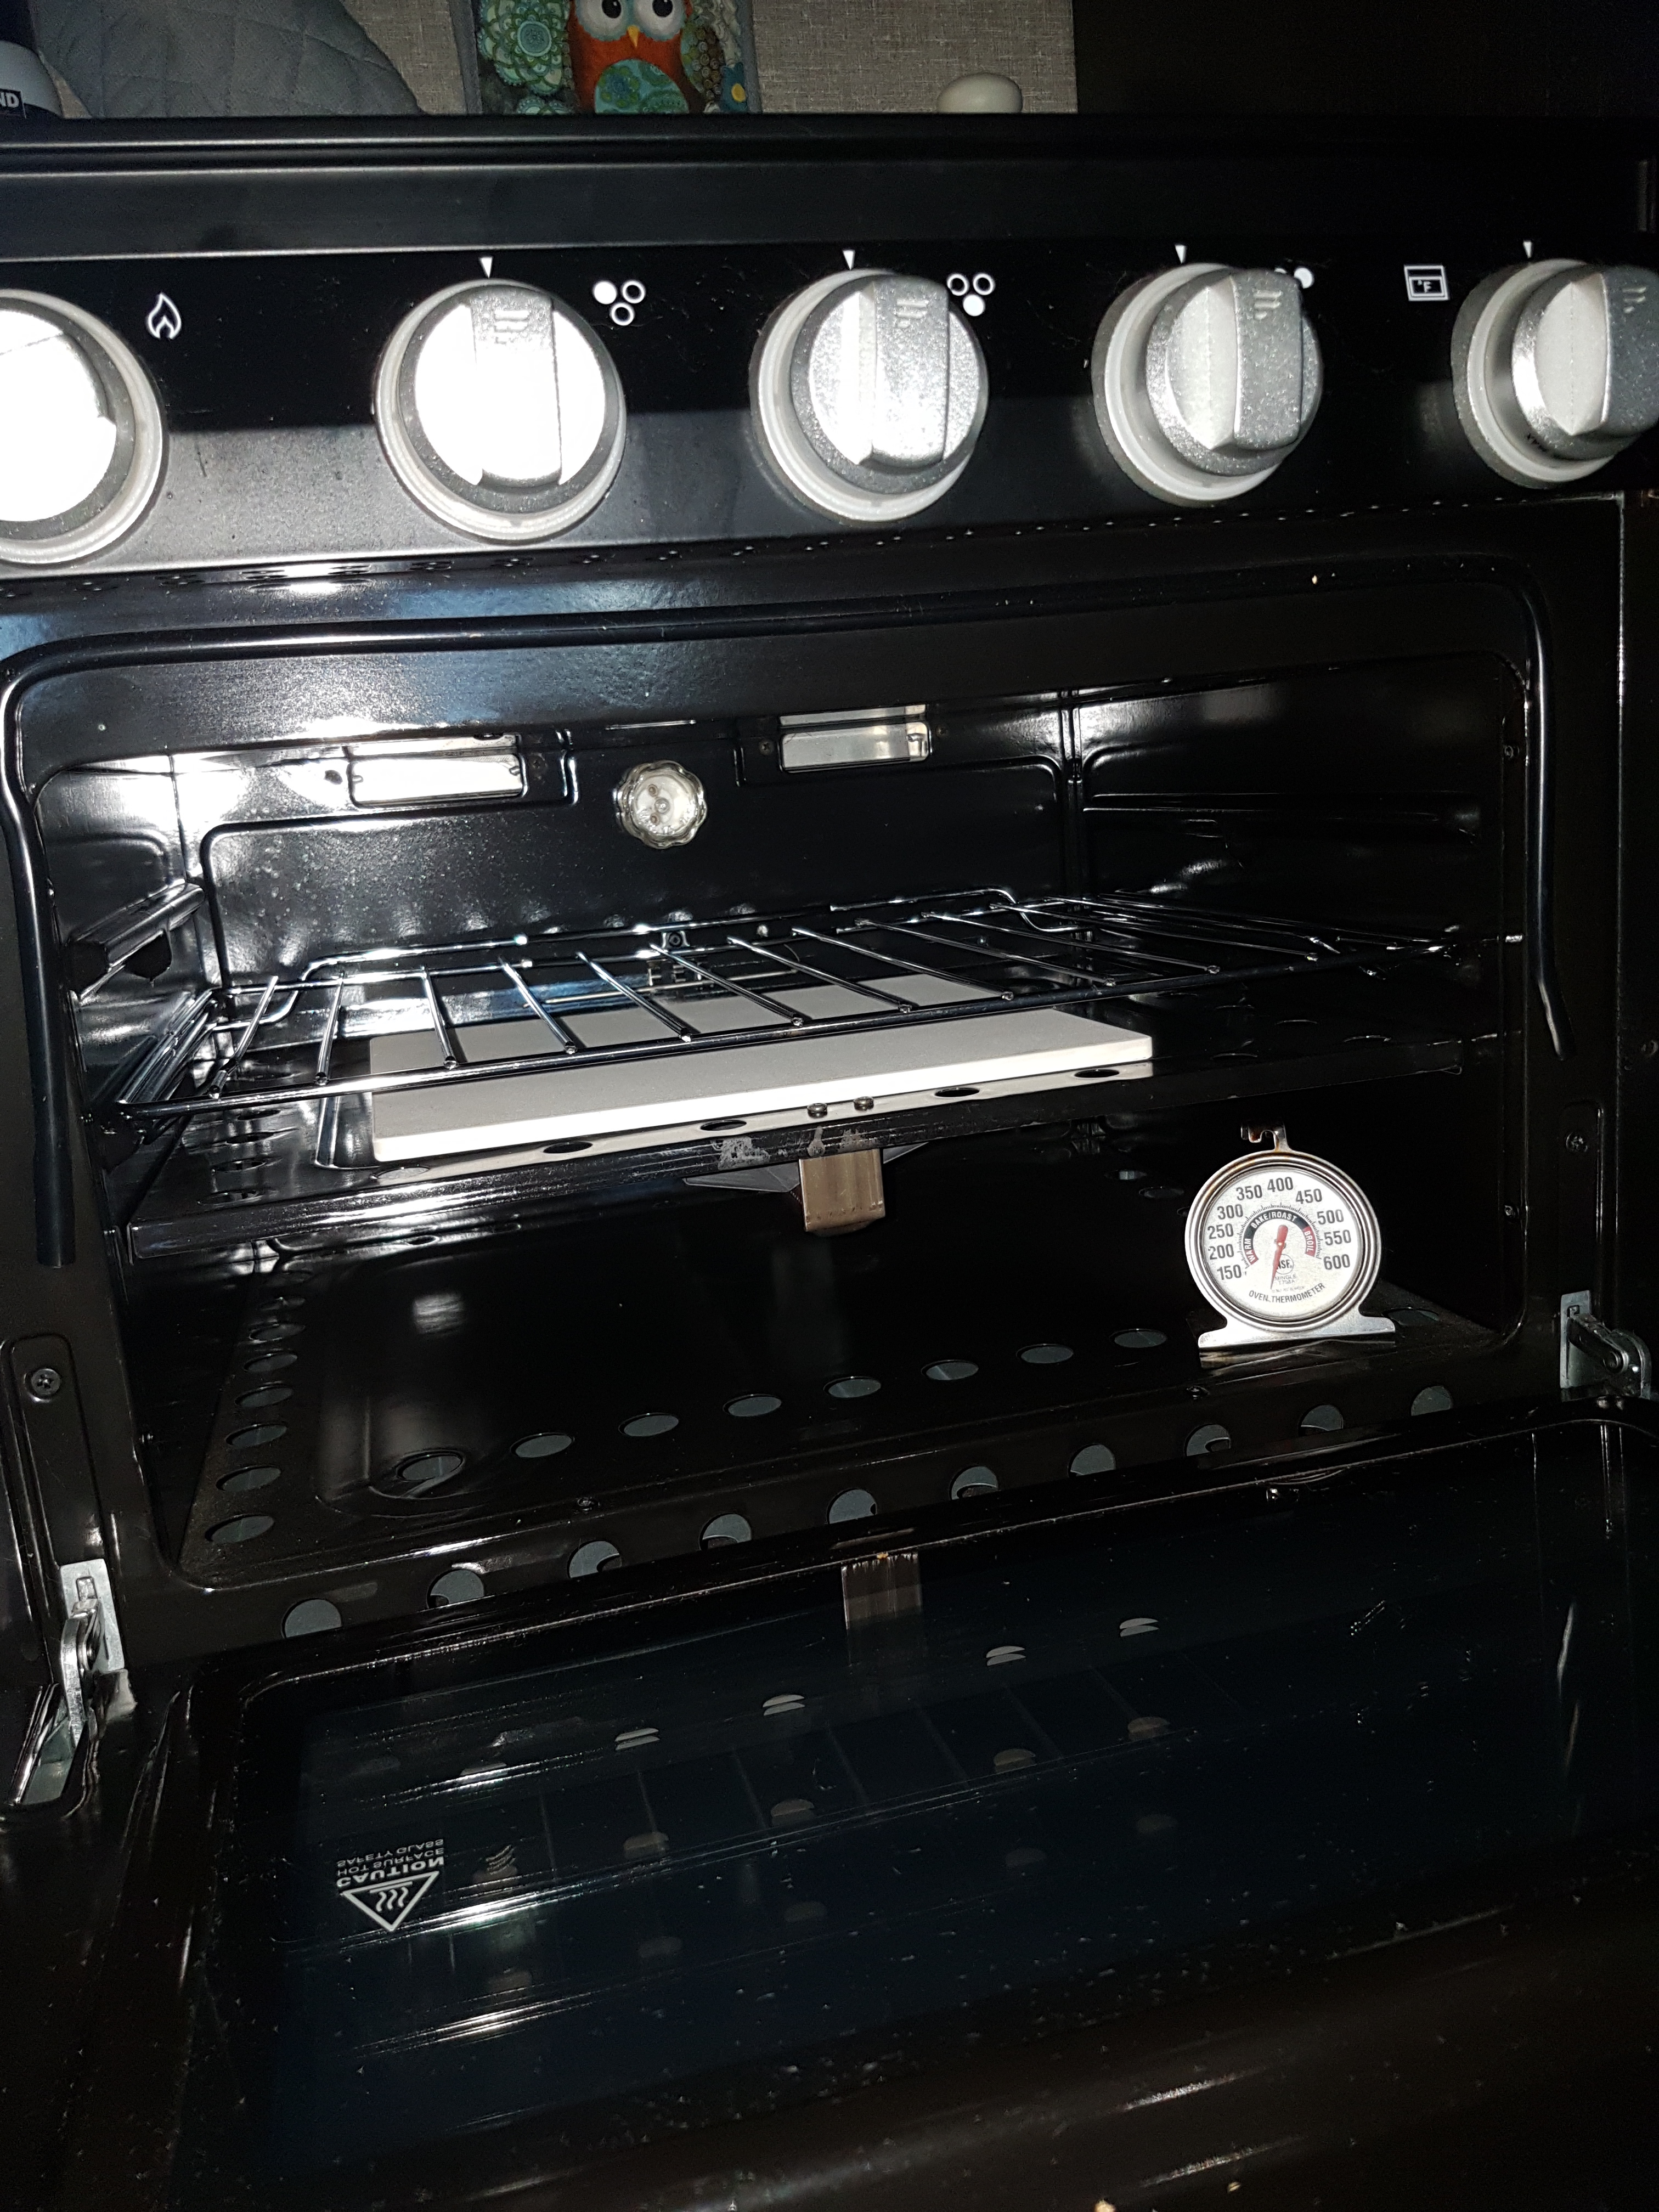 RV Oven Essentials – Discover the Imagined